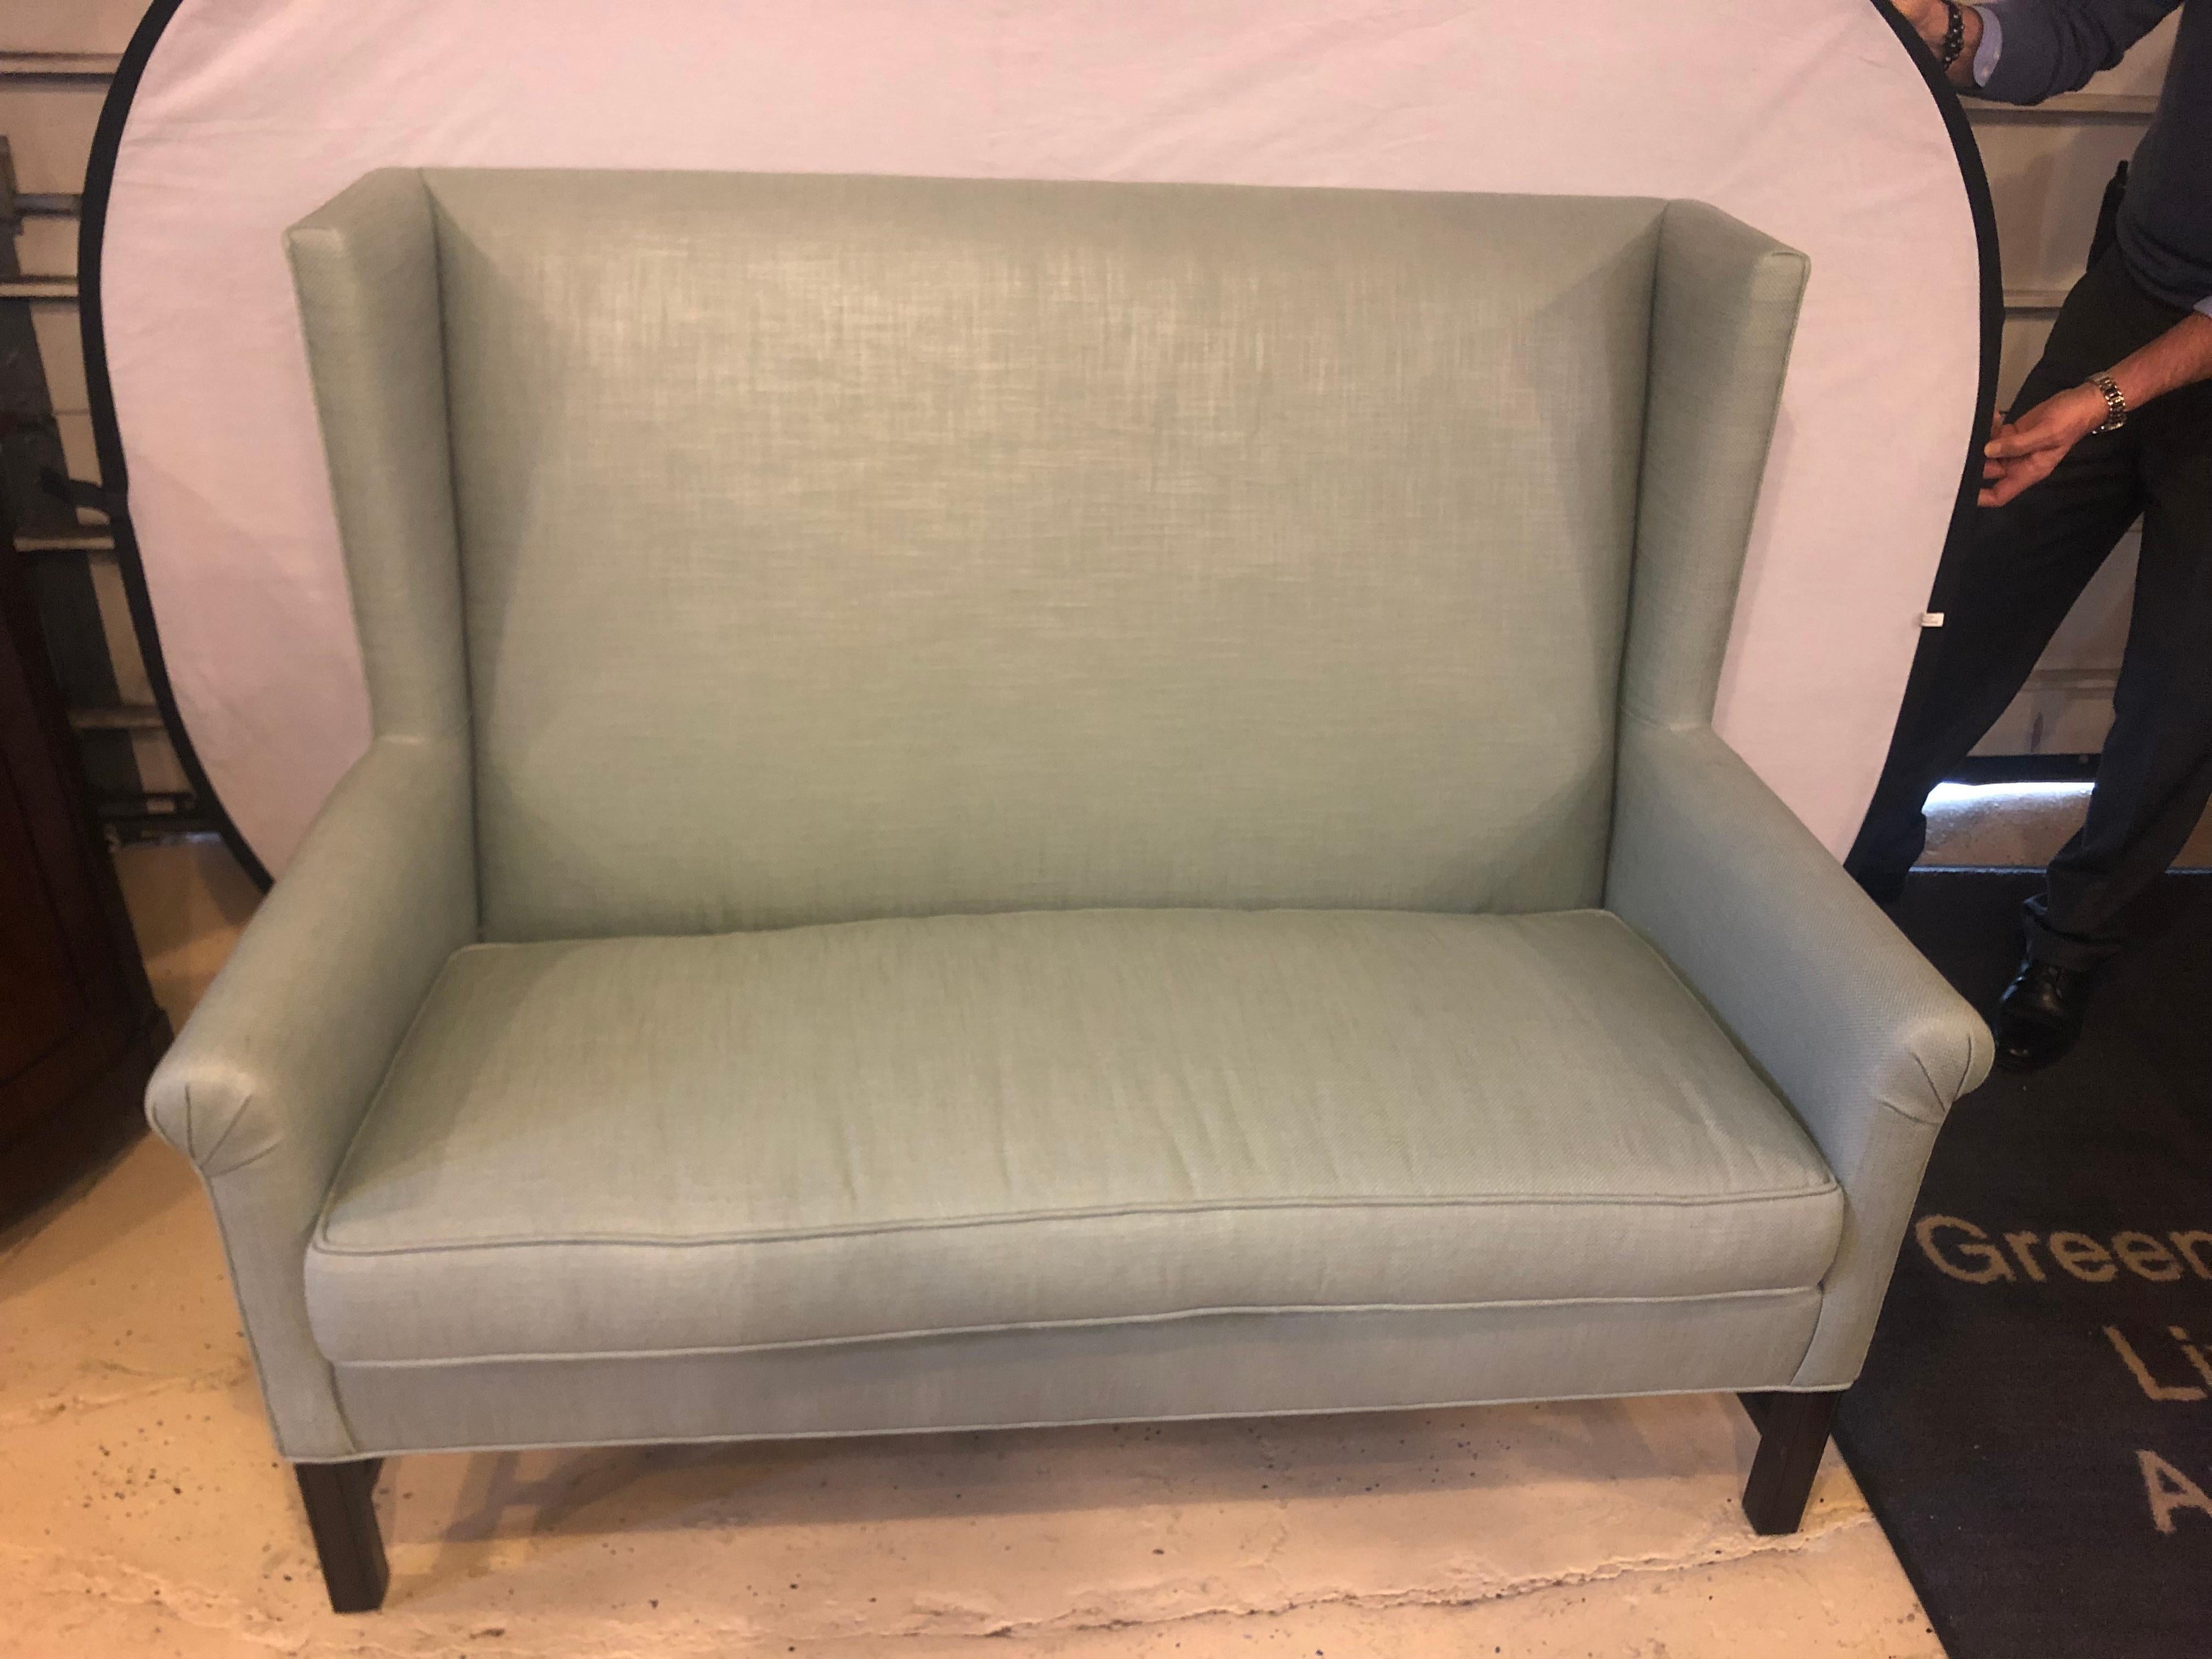 Hickory Co Charles Stewar Chippendale Style Settee or Loveseat in Green Linen
A Hickory Furniture Company by Charles Stewart Tweed Linen Chippendale style wing backed settee - loveseat or sofa. This finely covered loveseat or sofa is simply